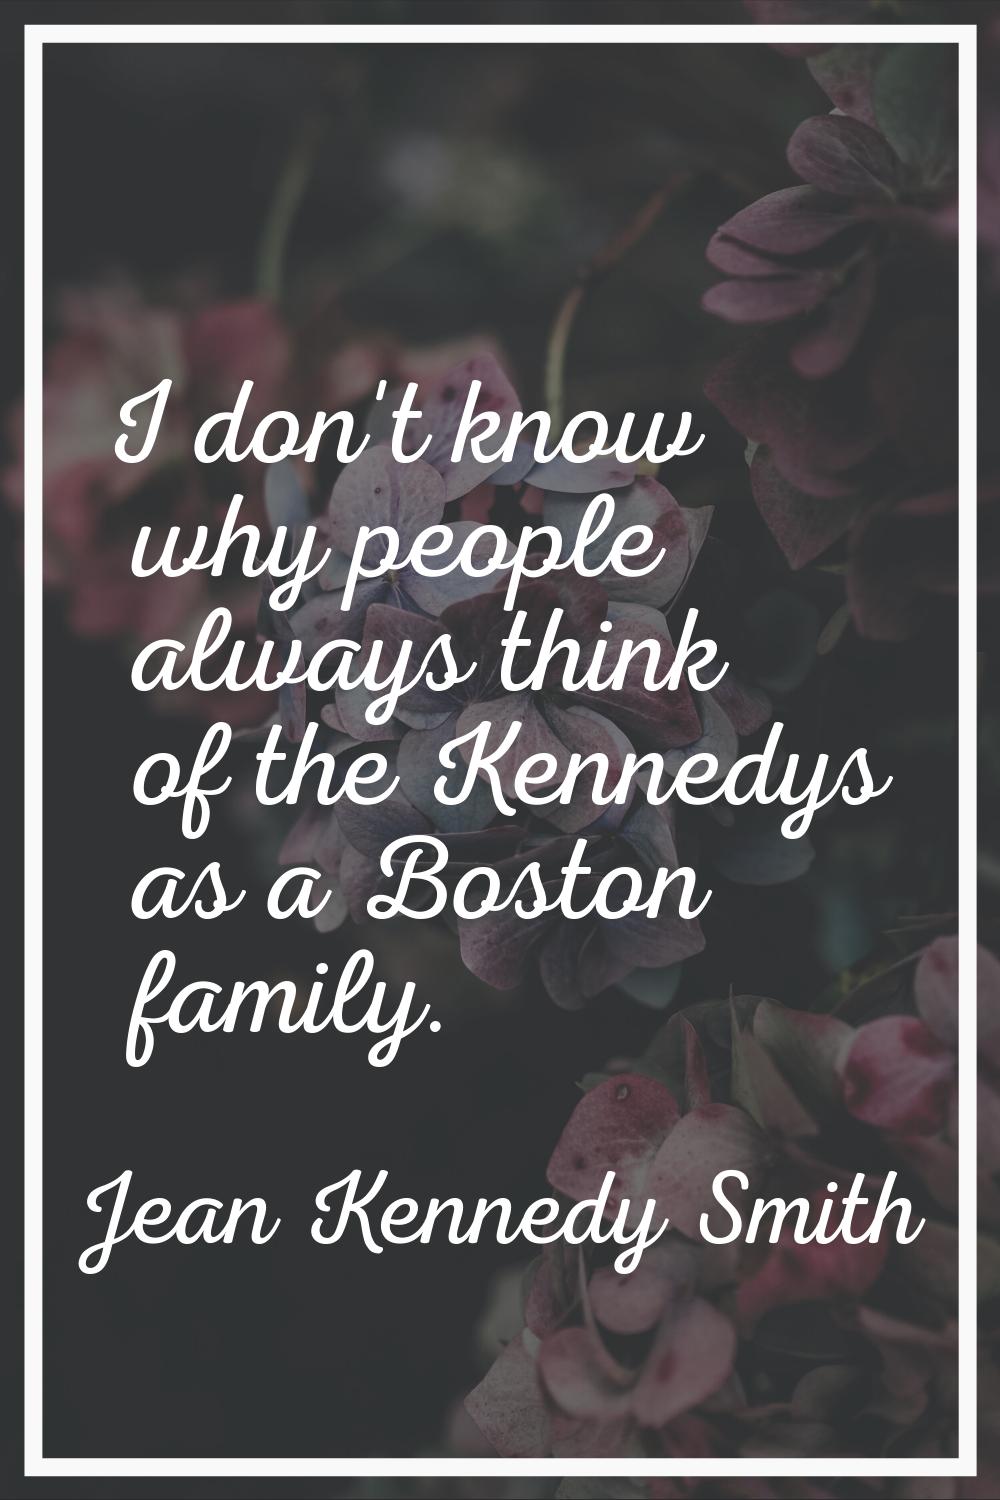 I don't know why people always think of the Kennedys as a Boston family.